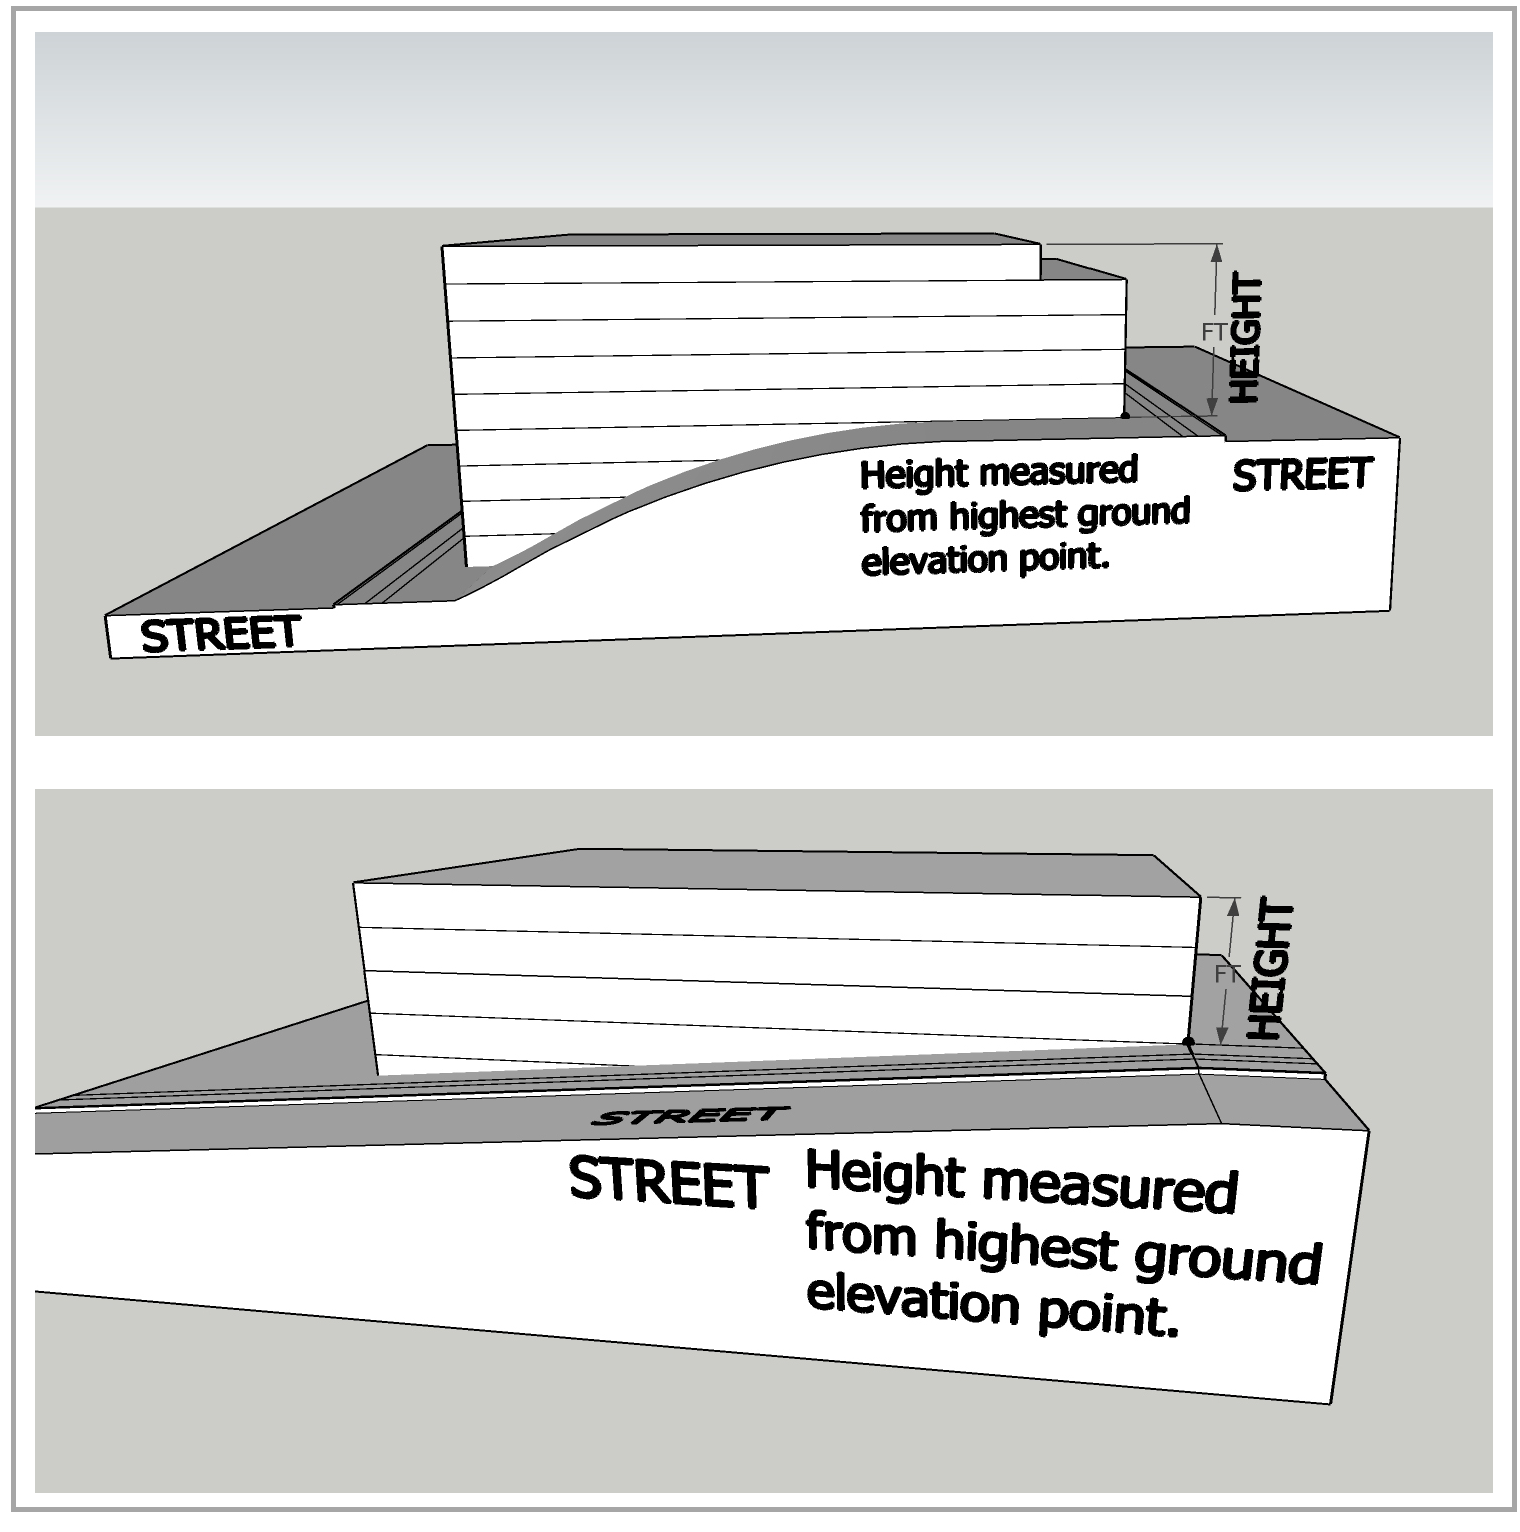 We measure the Pedestrian Crossing sign as if it were a square. Measuring  the sign from the top tip to the bottom tip, however, would give a height